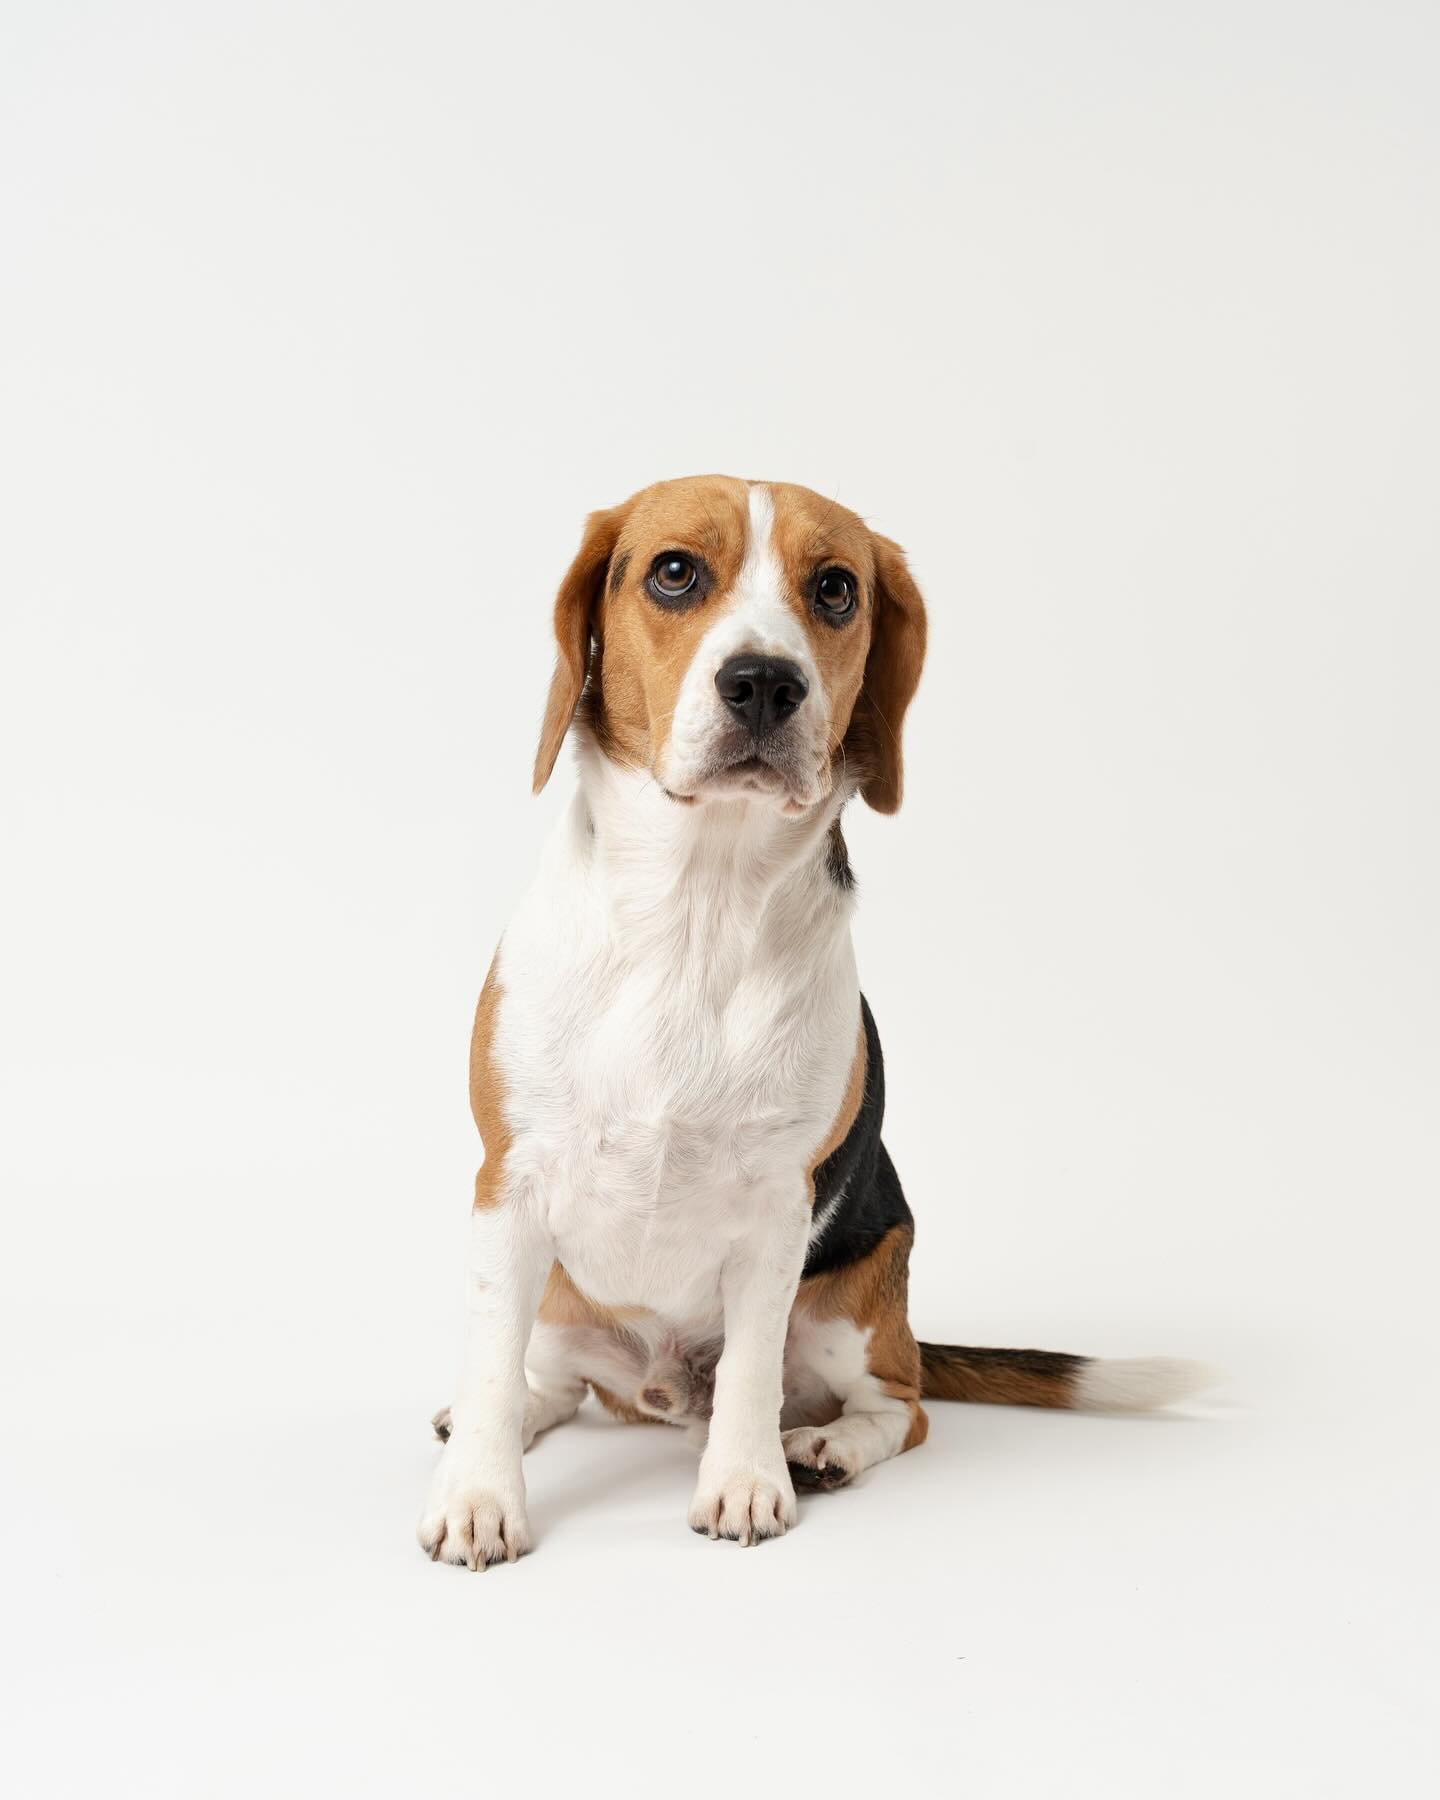 I had such an amazing time photographing Chewy from @iamchewythebeagle 🐶

Majority of dogs are always a good challenge to photograph but Chewy was definitely an acception. I absolutely adore Chewy and his modeling skills 🙌

#hawaiidogs #oahudogs #h